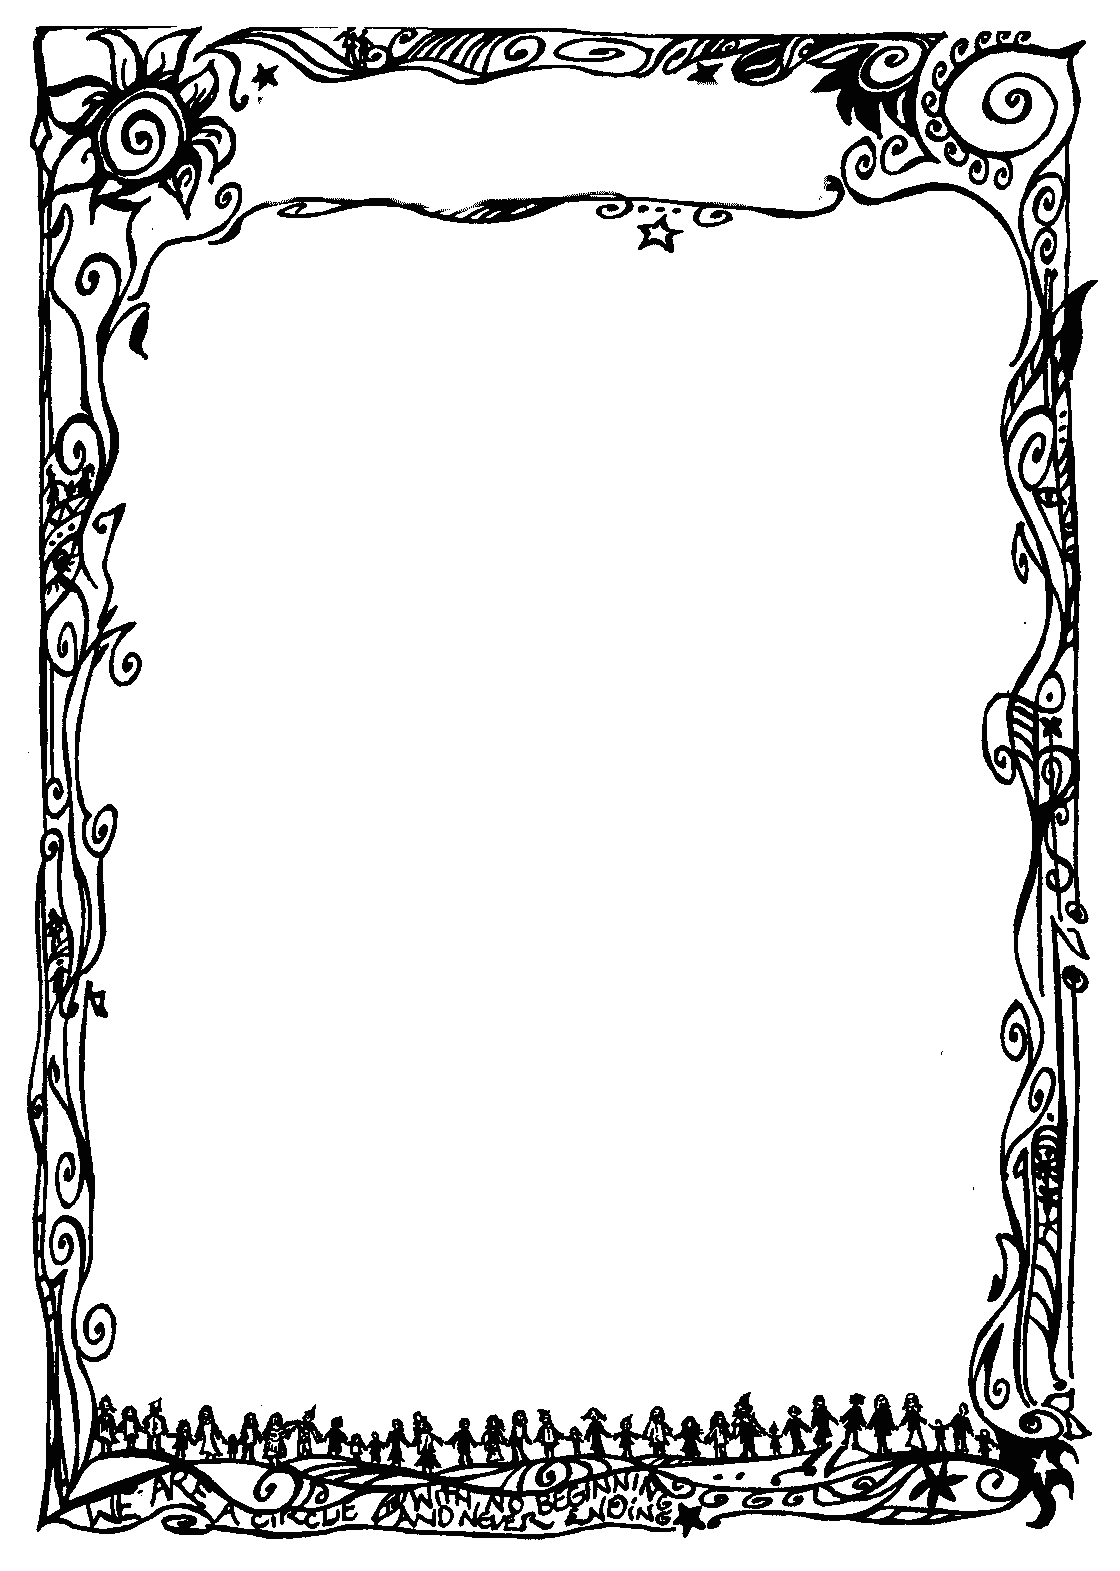 Bullet clipart fancy. Borders for word documents